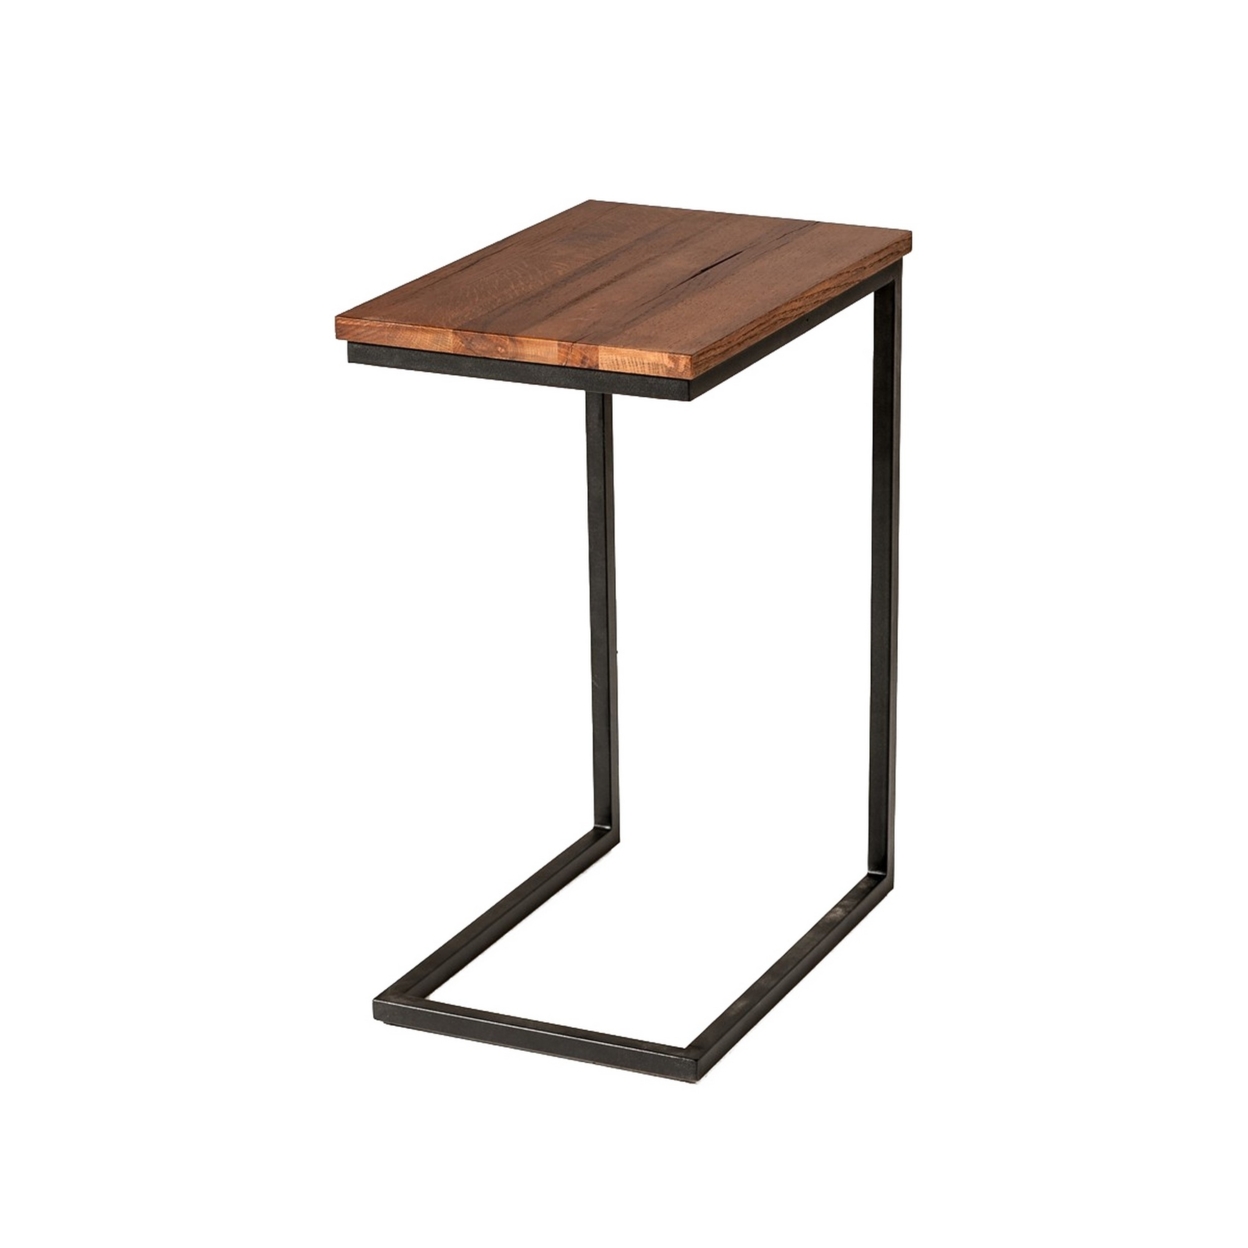 C Shaped End Table With Rectangular Wood Top, Brown And Black- Saltoro Sherpi